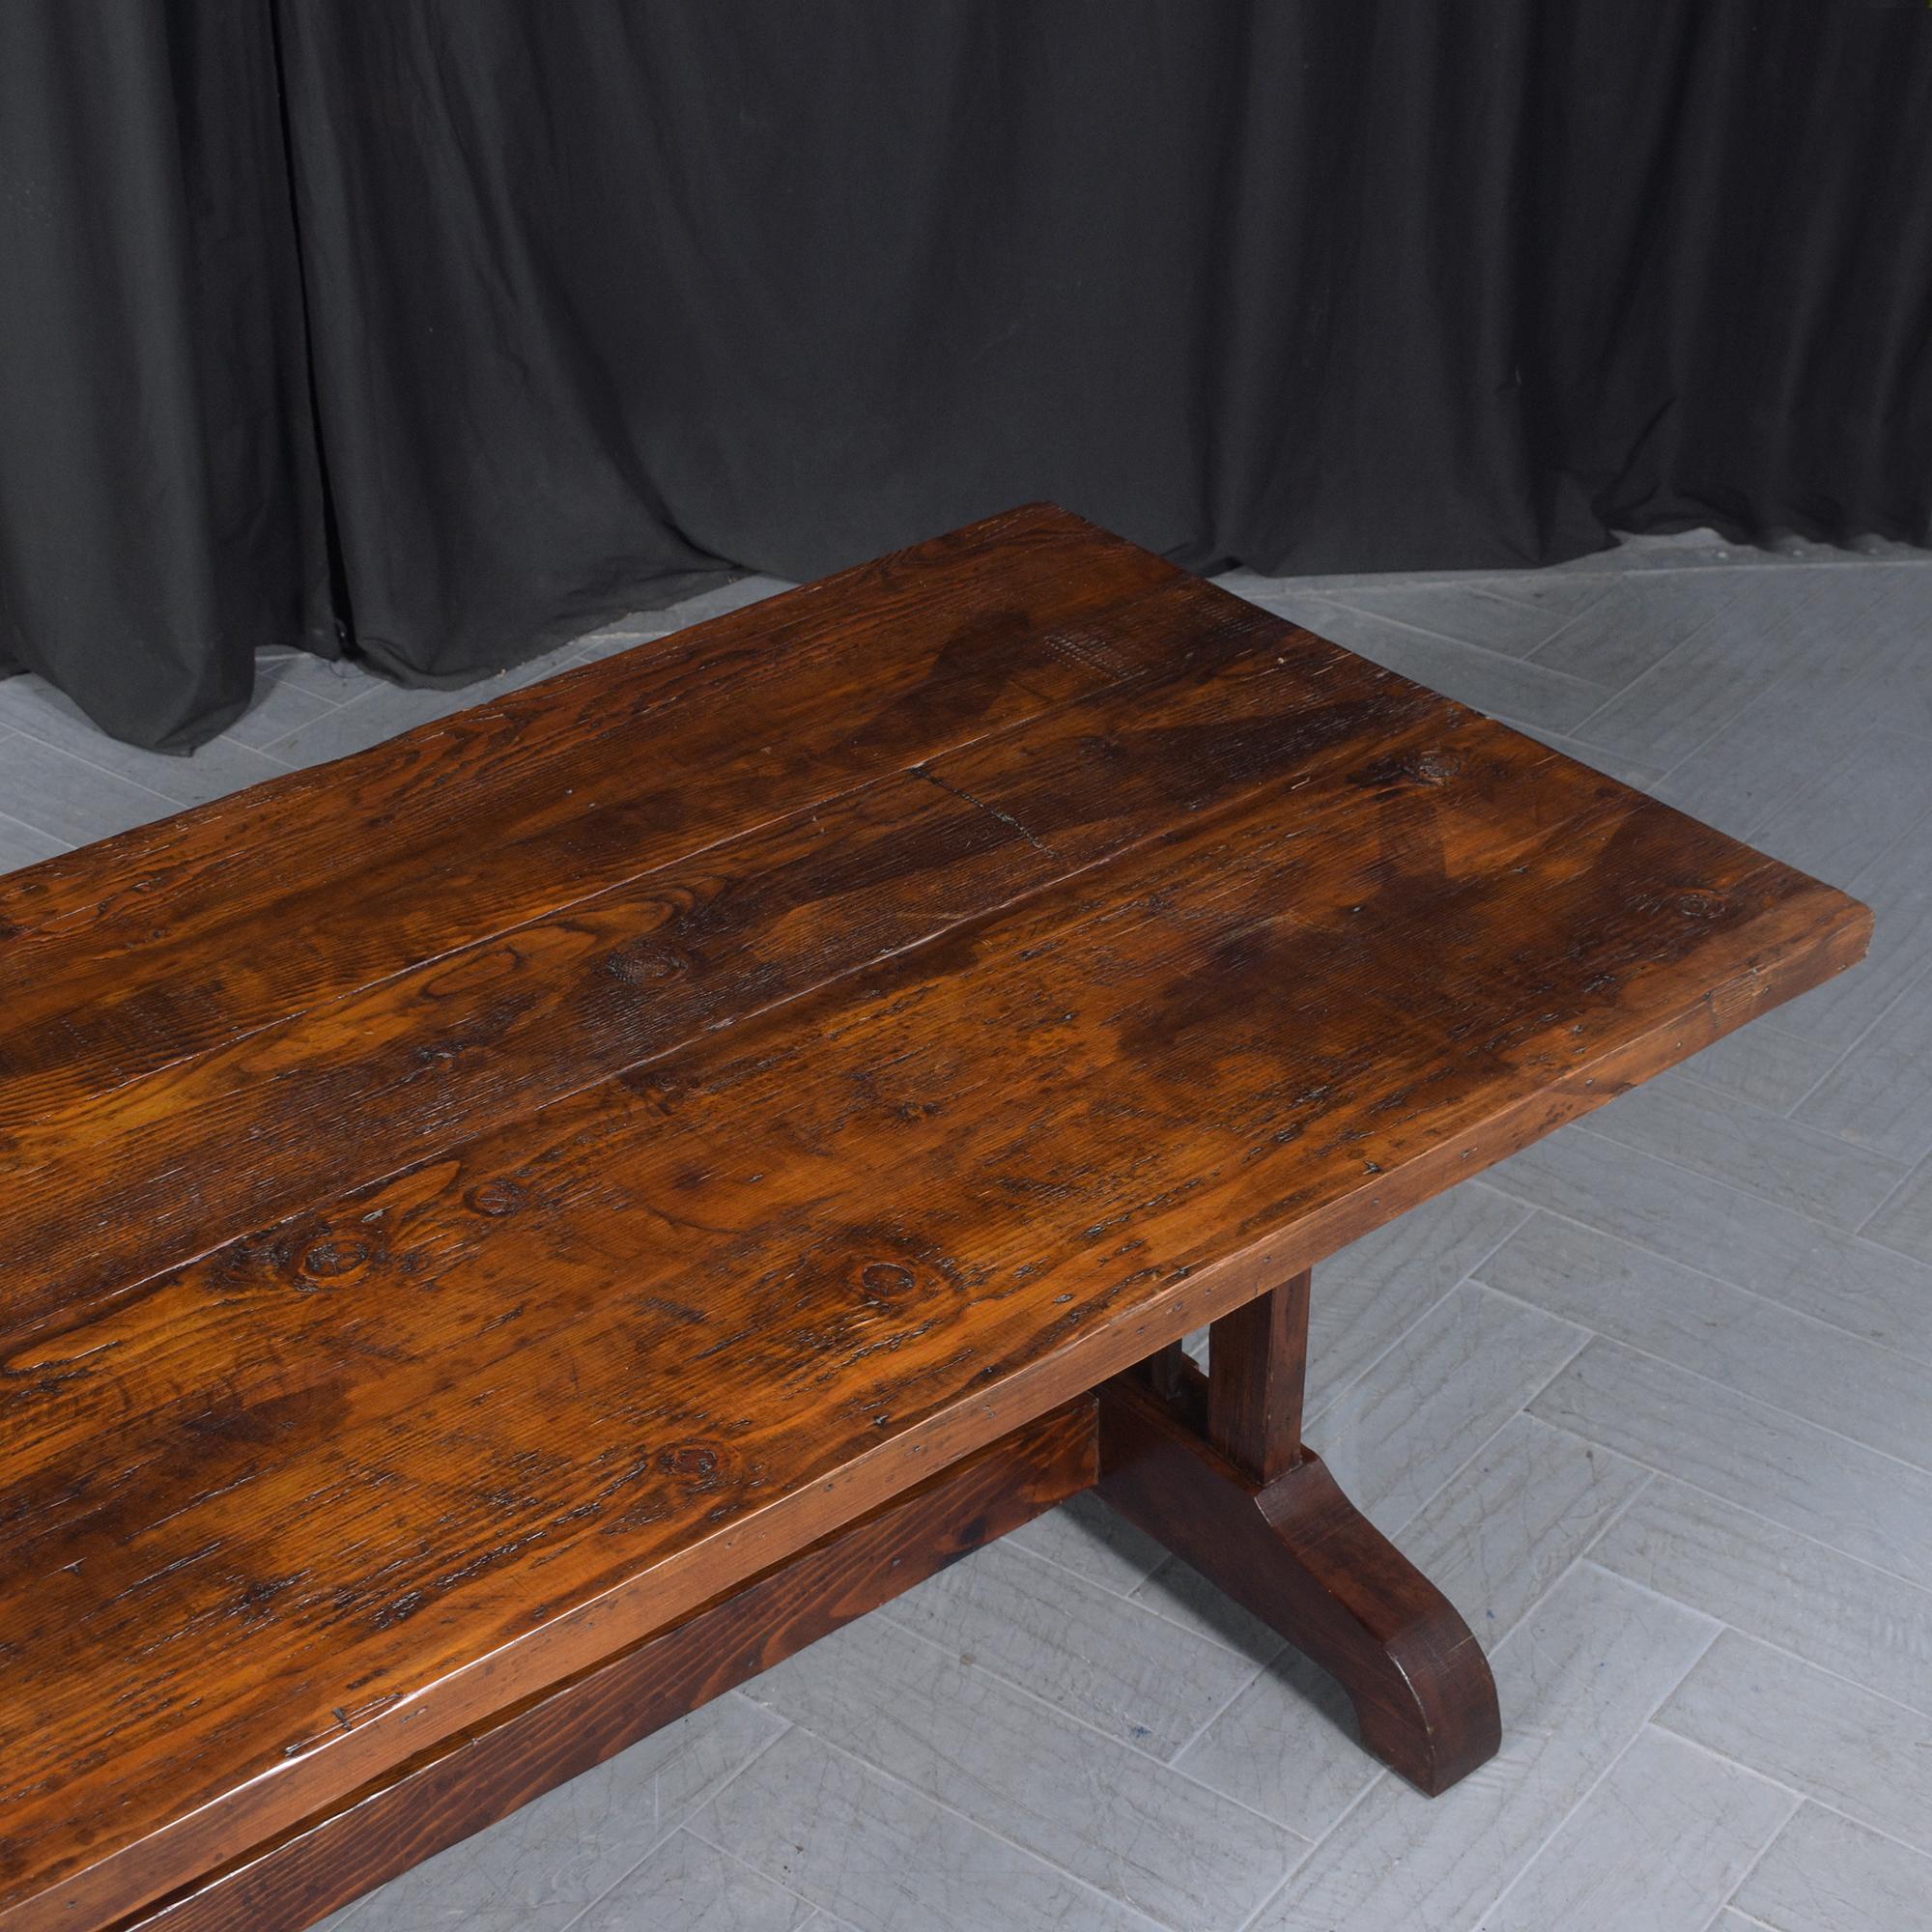 Spanish Colonial Vintage Solid Wood Dining Table with Iron Accents and Pedestal Legs For Sale